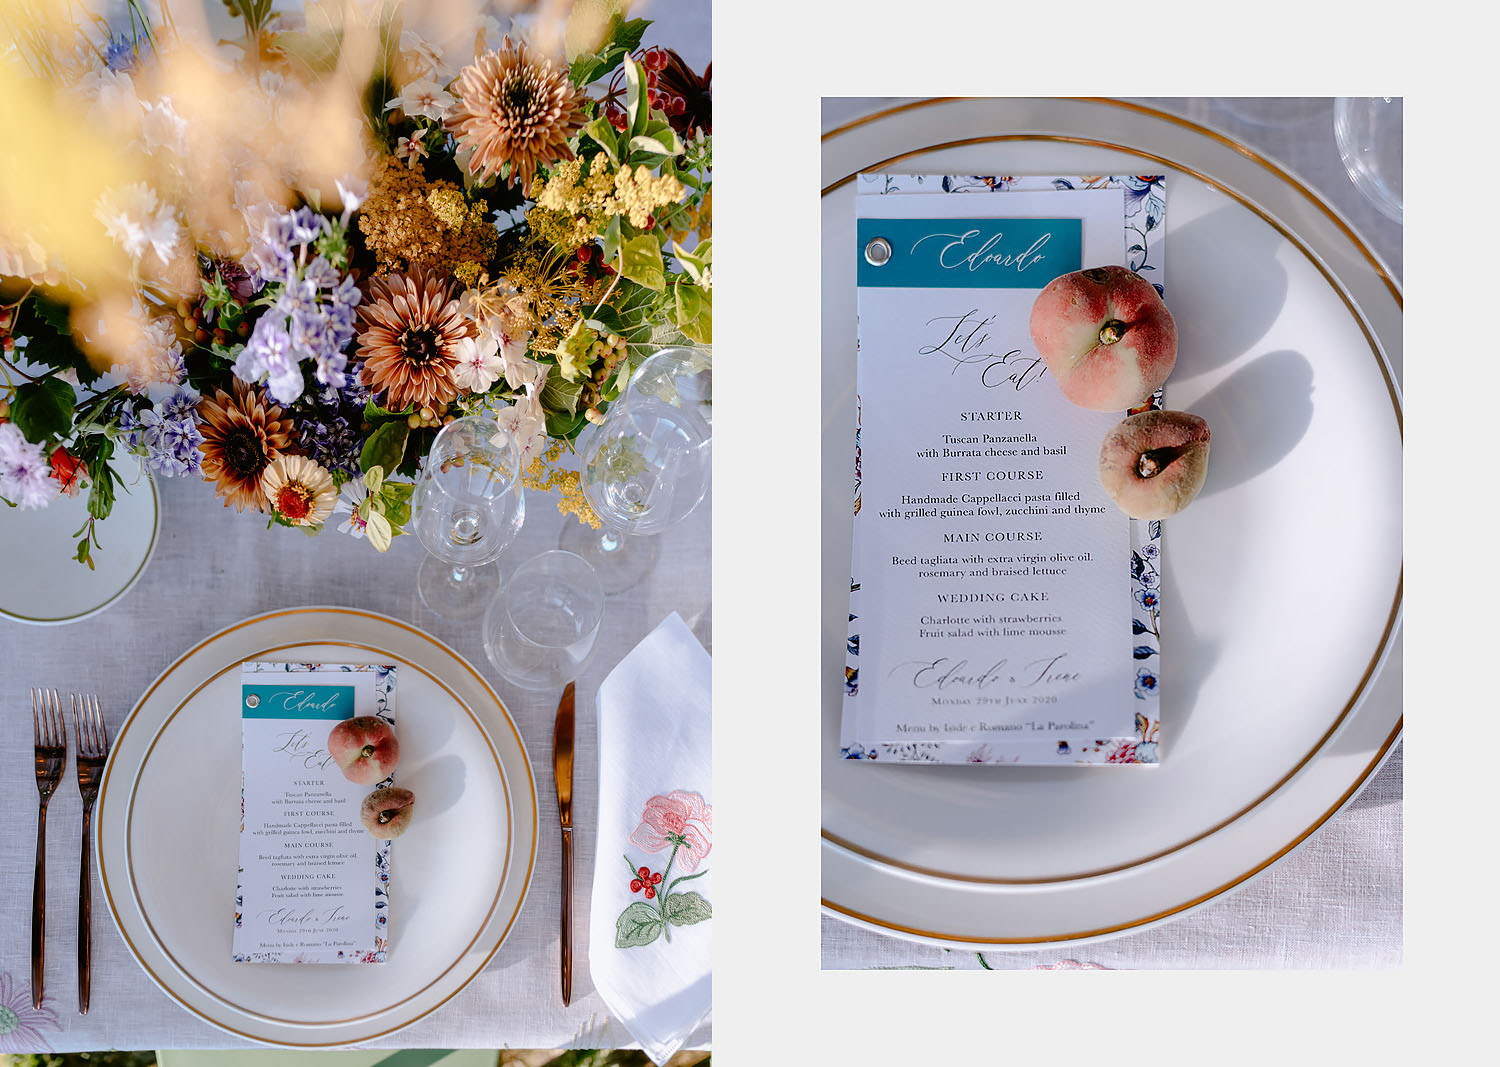 intimate Wedding Inspiration Tuscan Rolling Hills mise en place puscina flowers loretta caponi event set tuscan lab